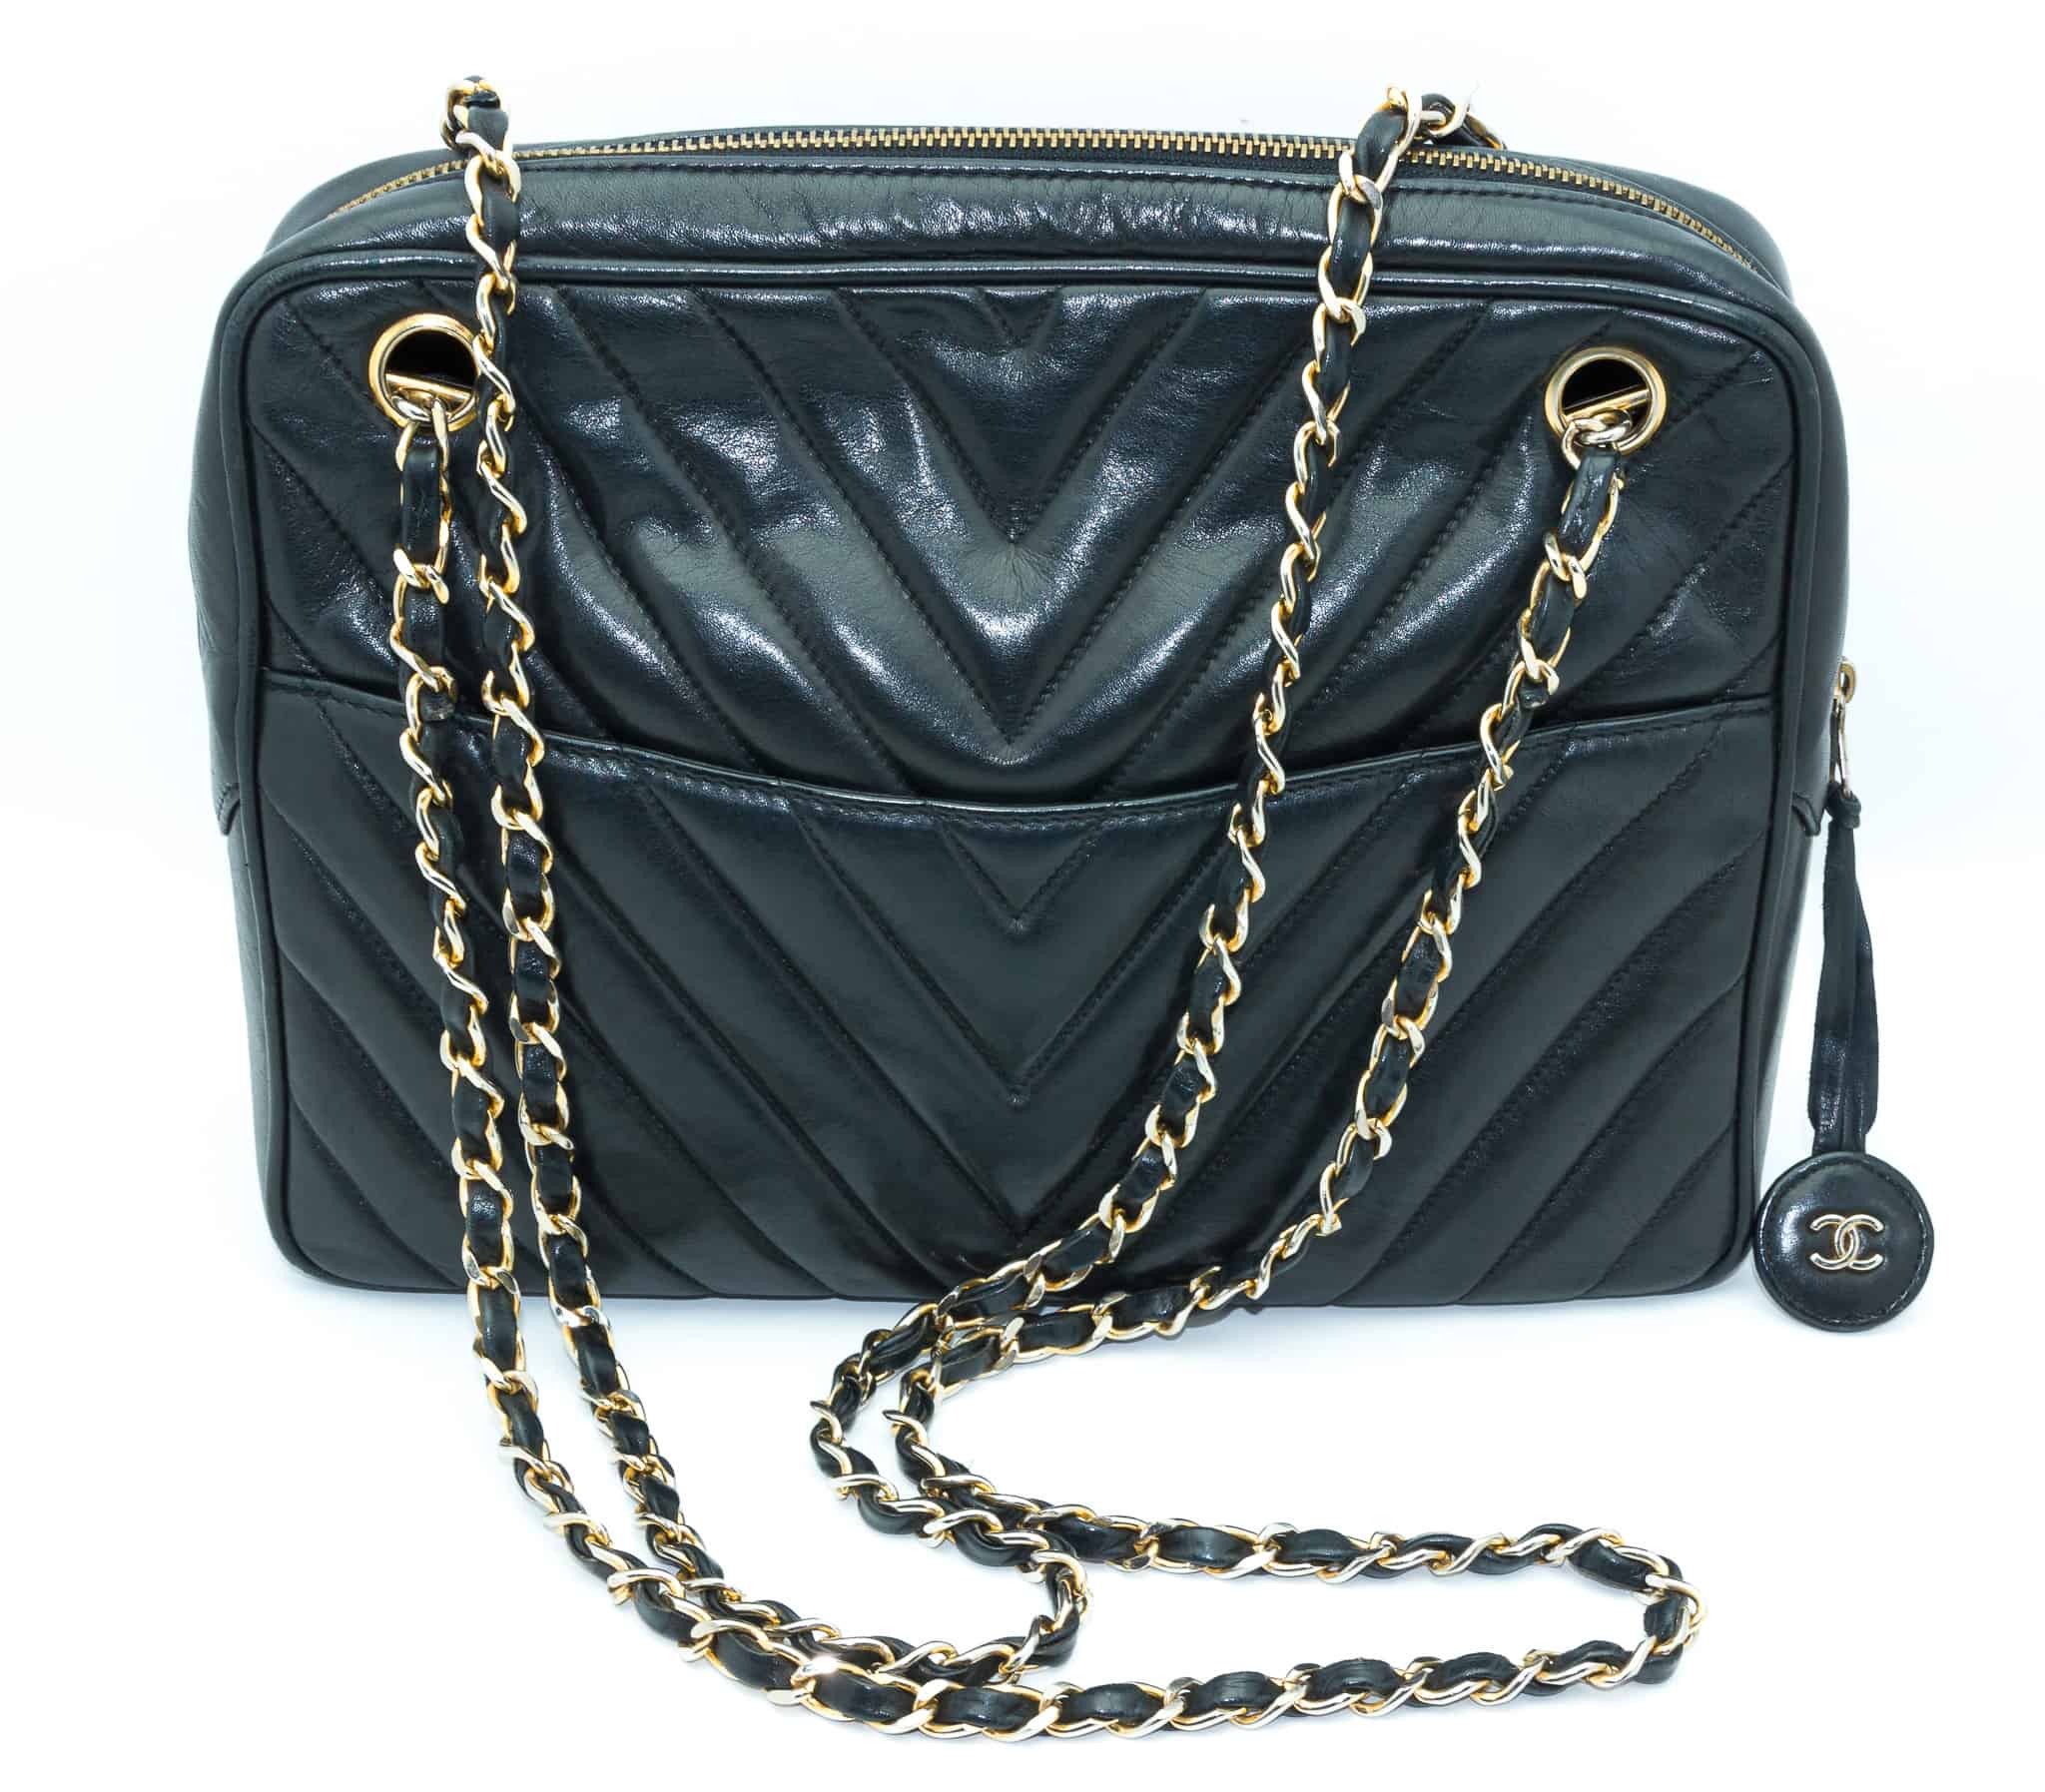 Timeless/classique leather handbag Chanel Black in Leather - 31789810